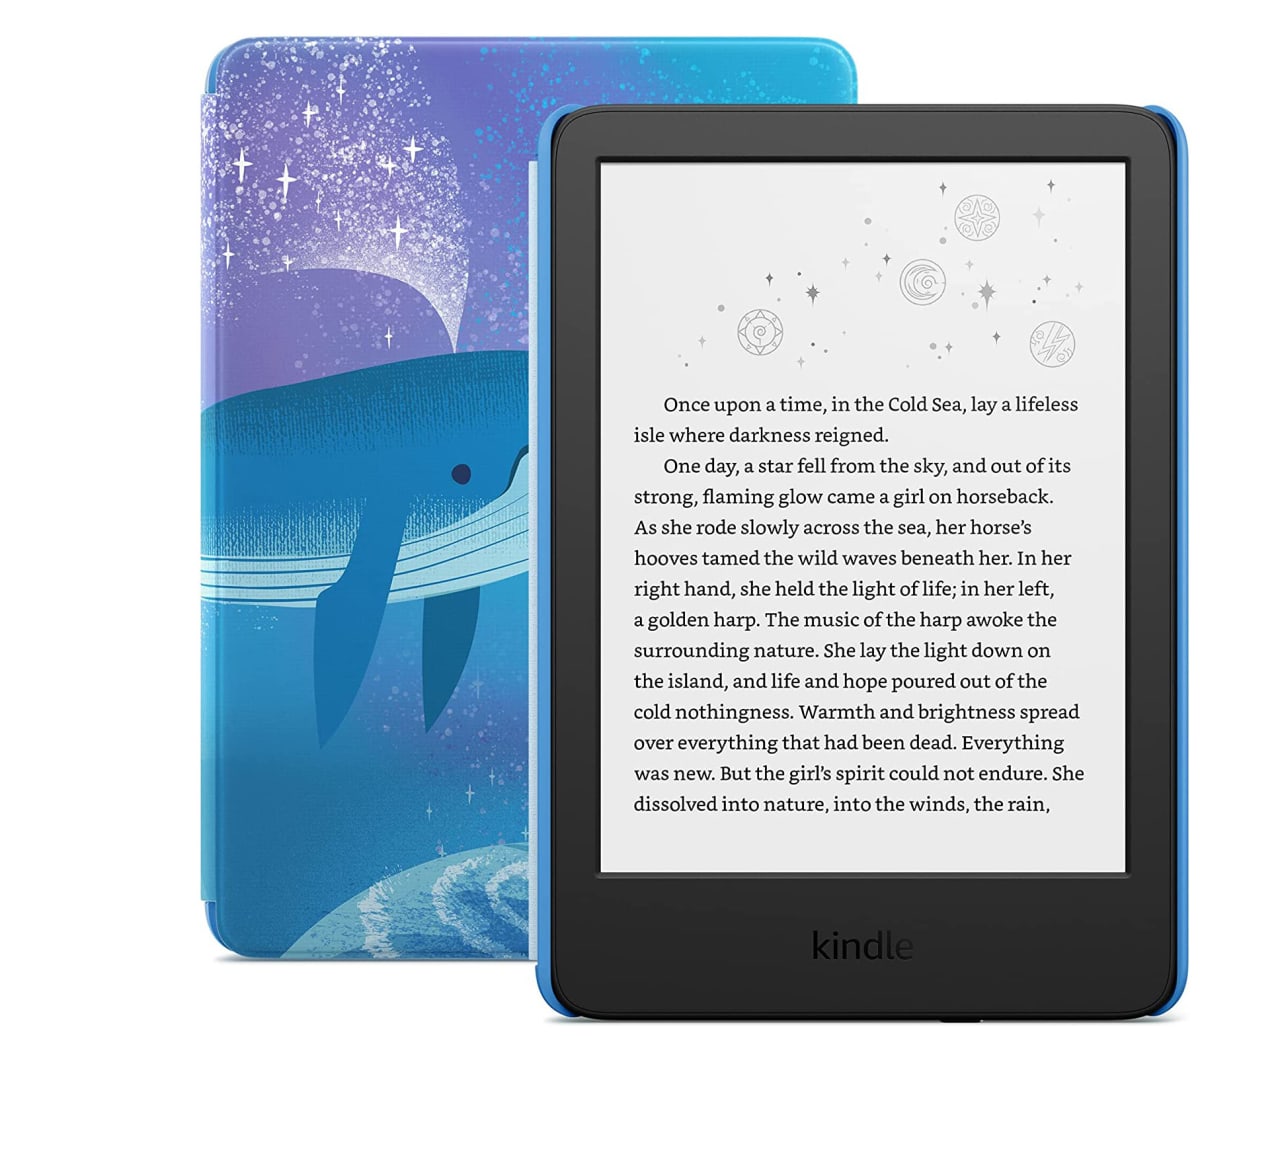 Kobo's latest e-reader is called the Forma